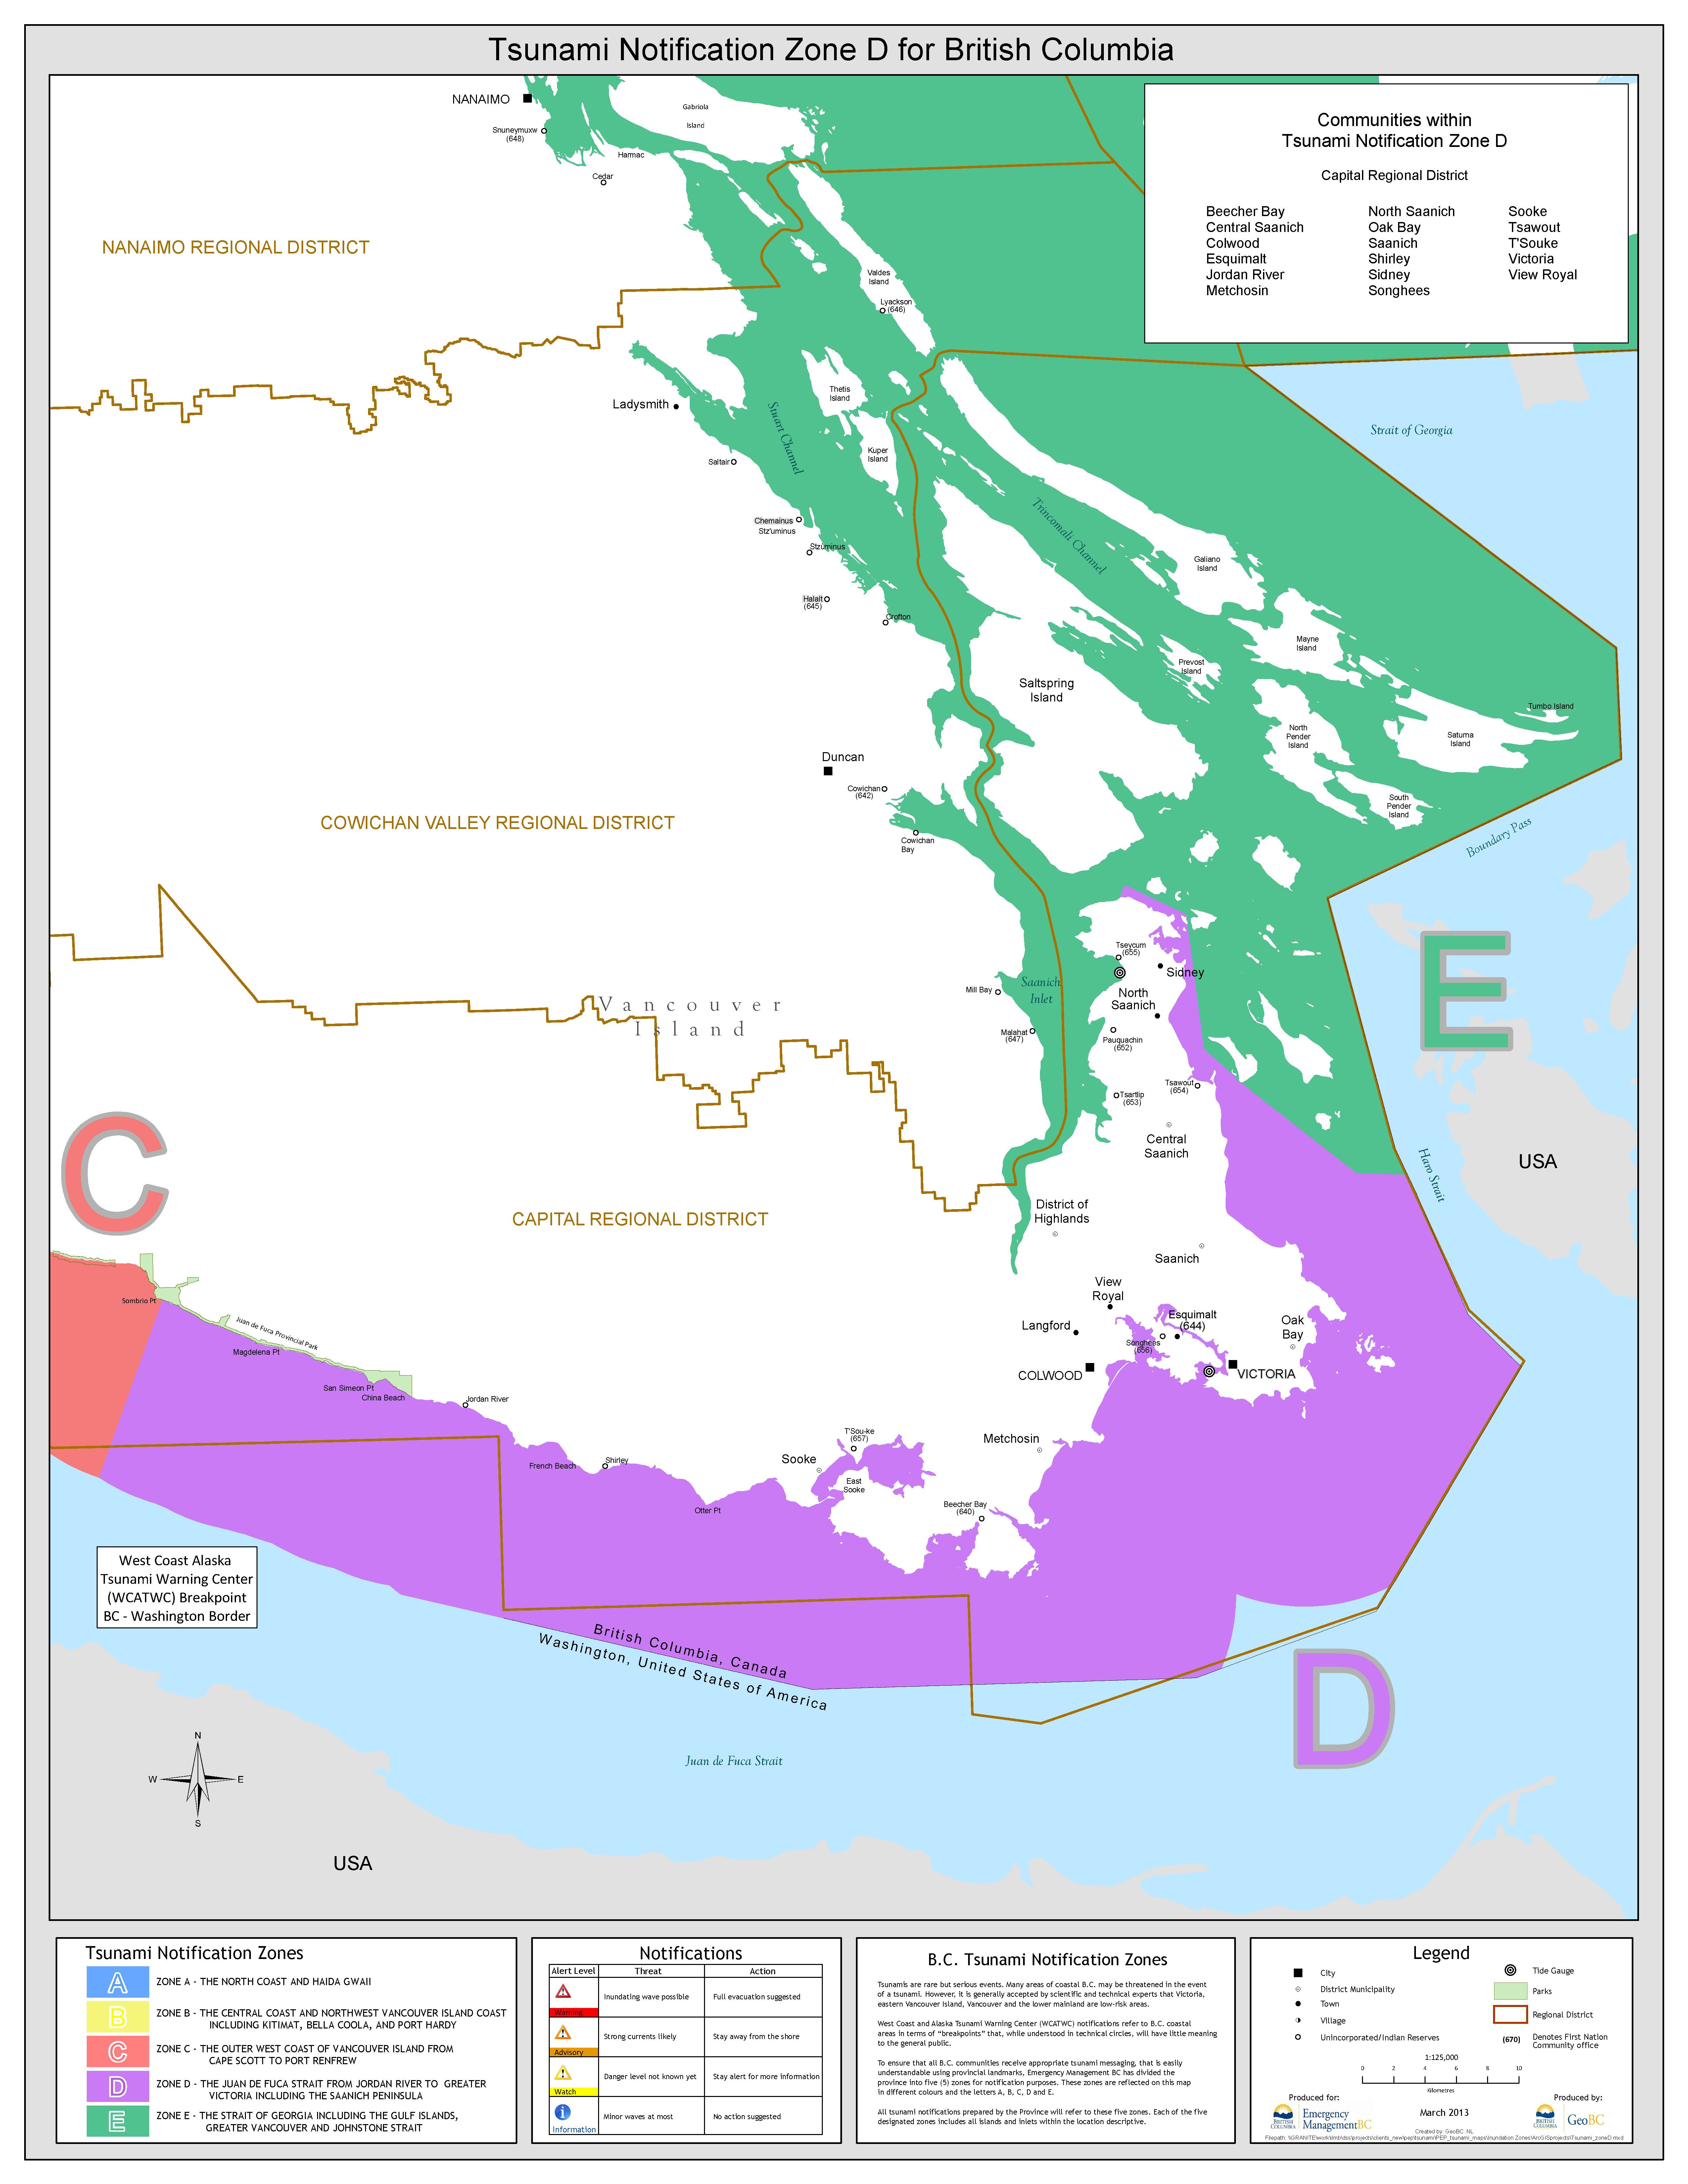 Highlighted map showing BC Tsunami Zone D. Zone D includes The Juan de Fuca Strait from Jordan River to Greater Victoria Area including the Saanich Peninsula.